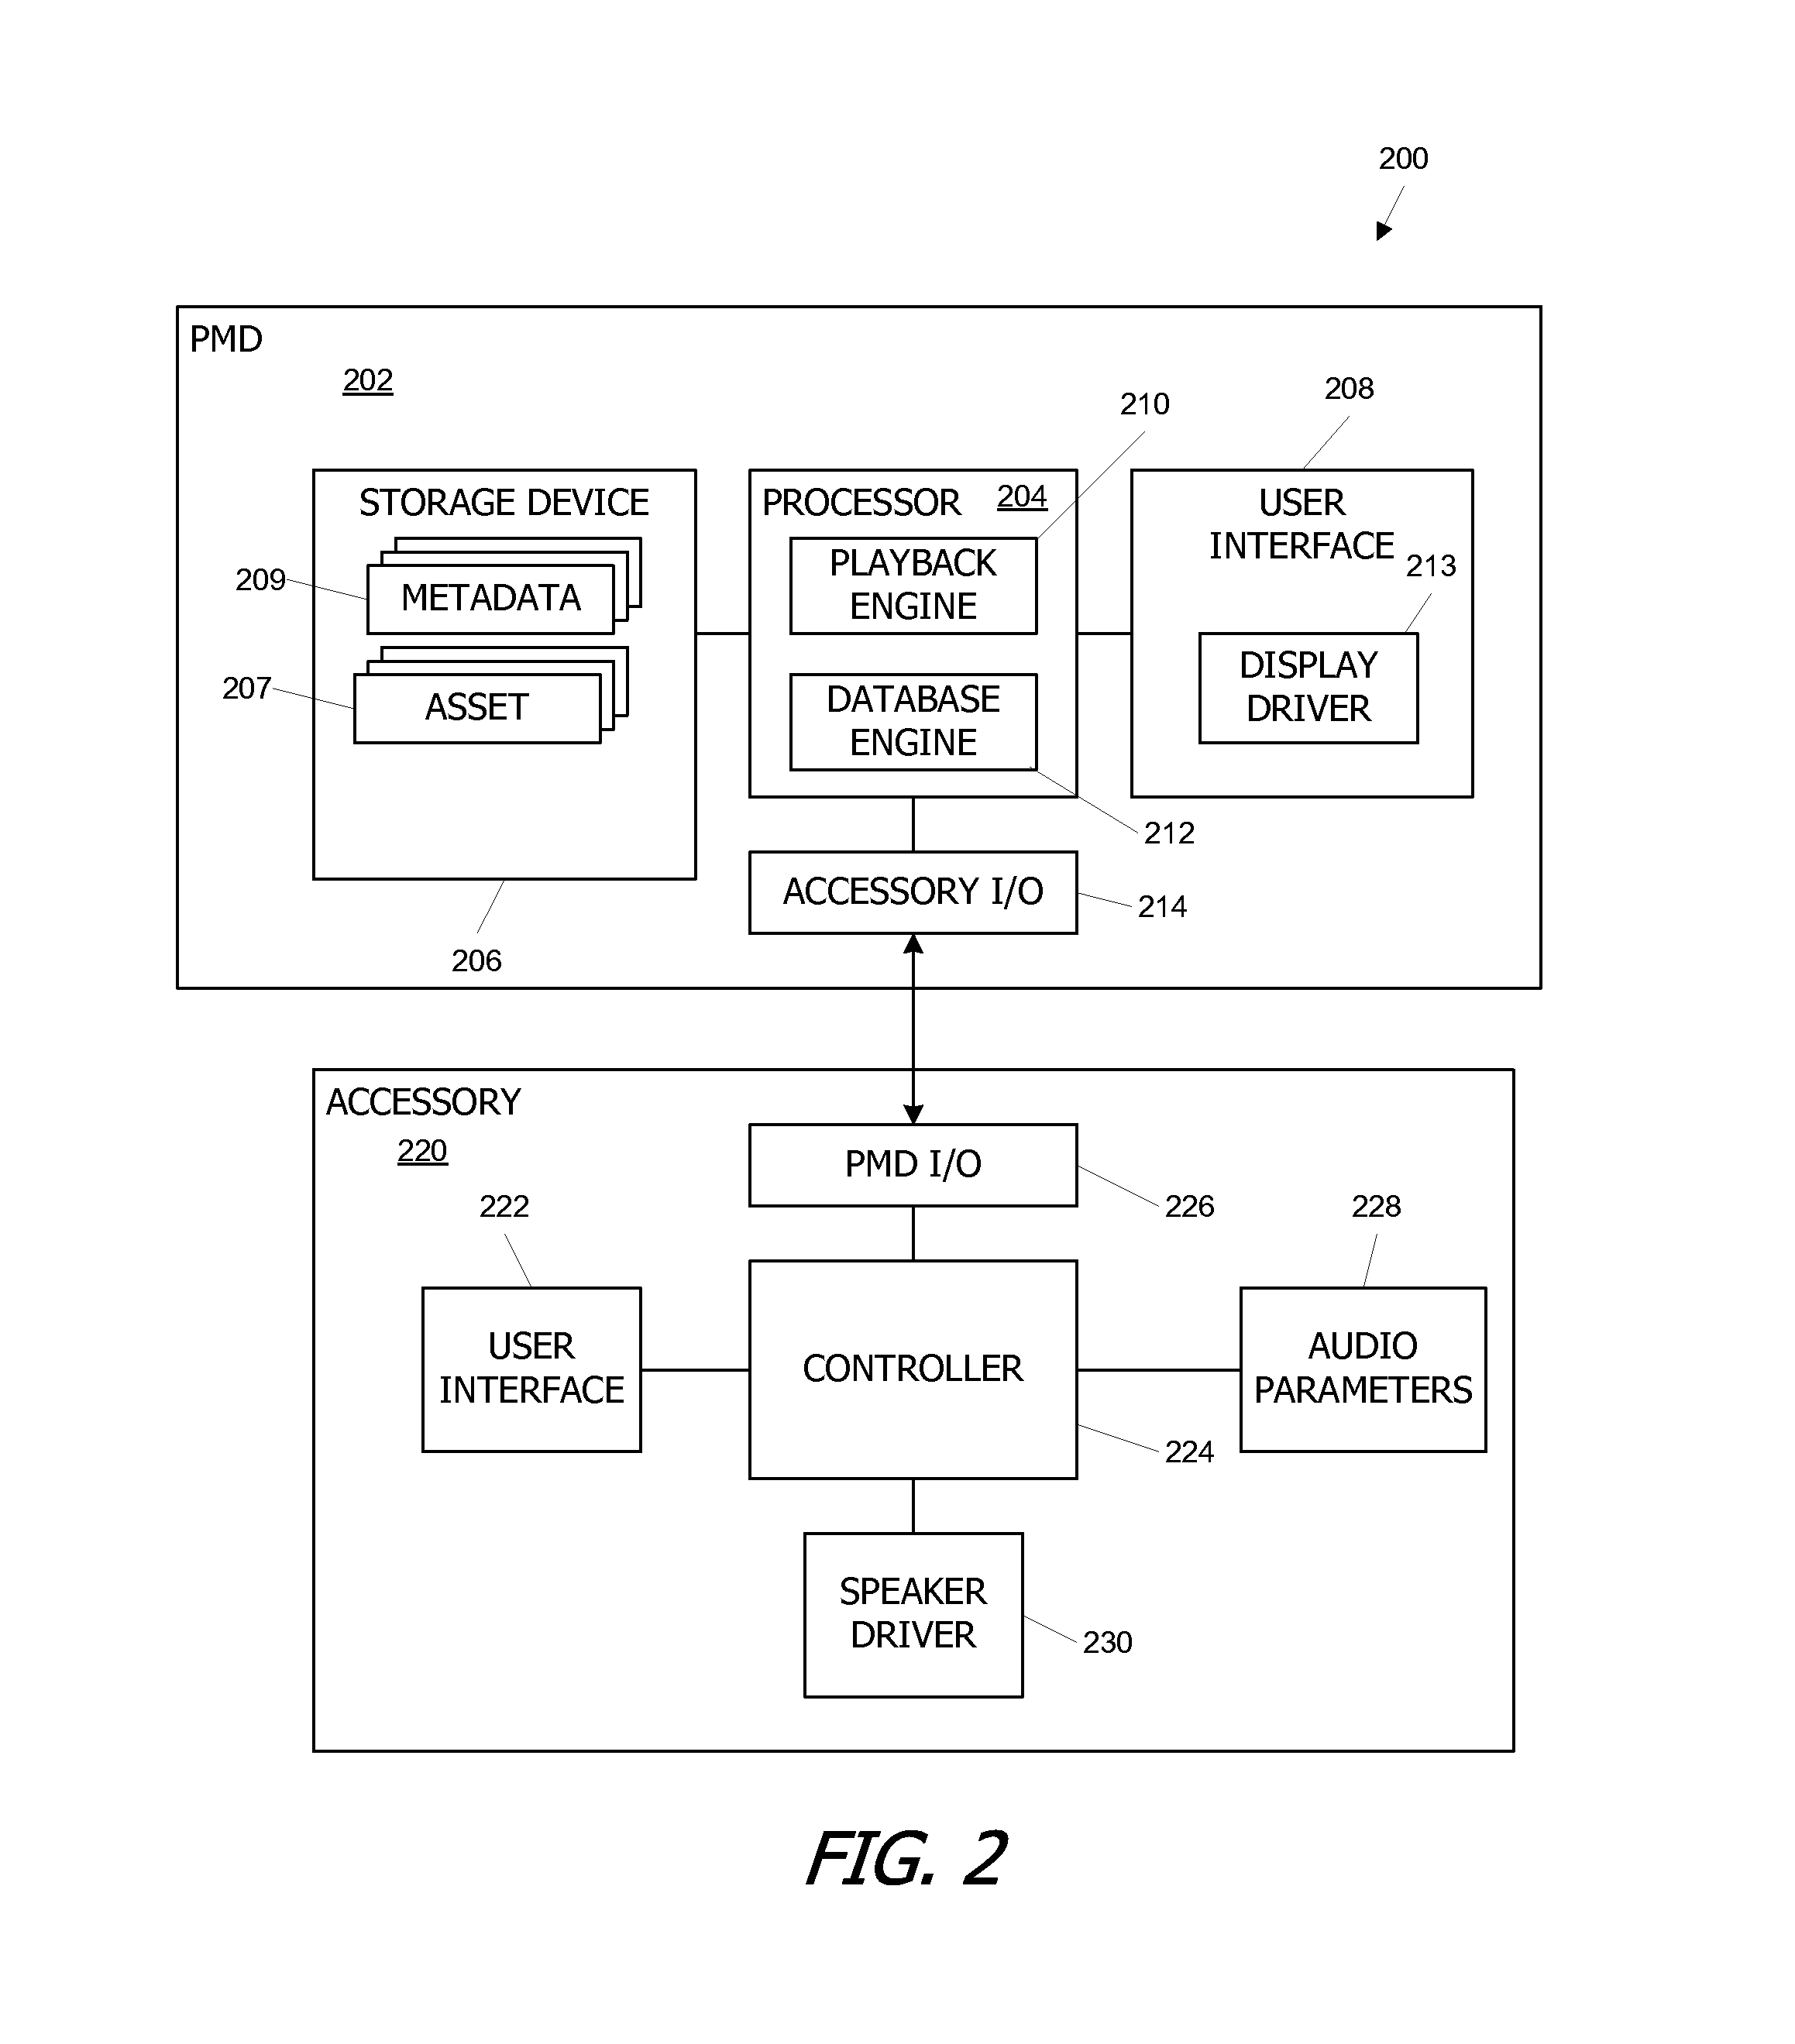 Synchronizing digital audio and analog video from a portable media device